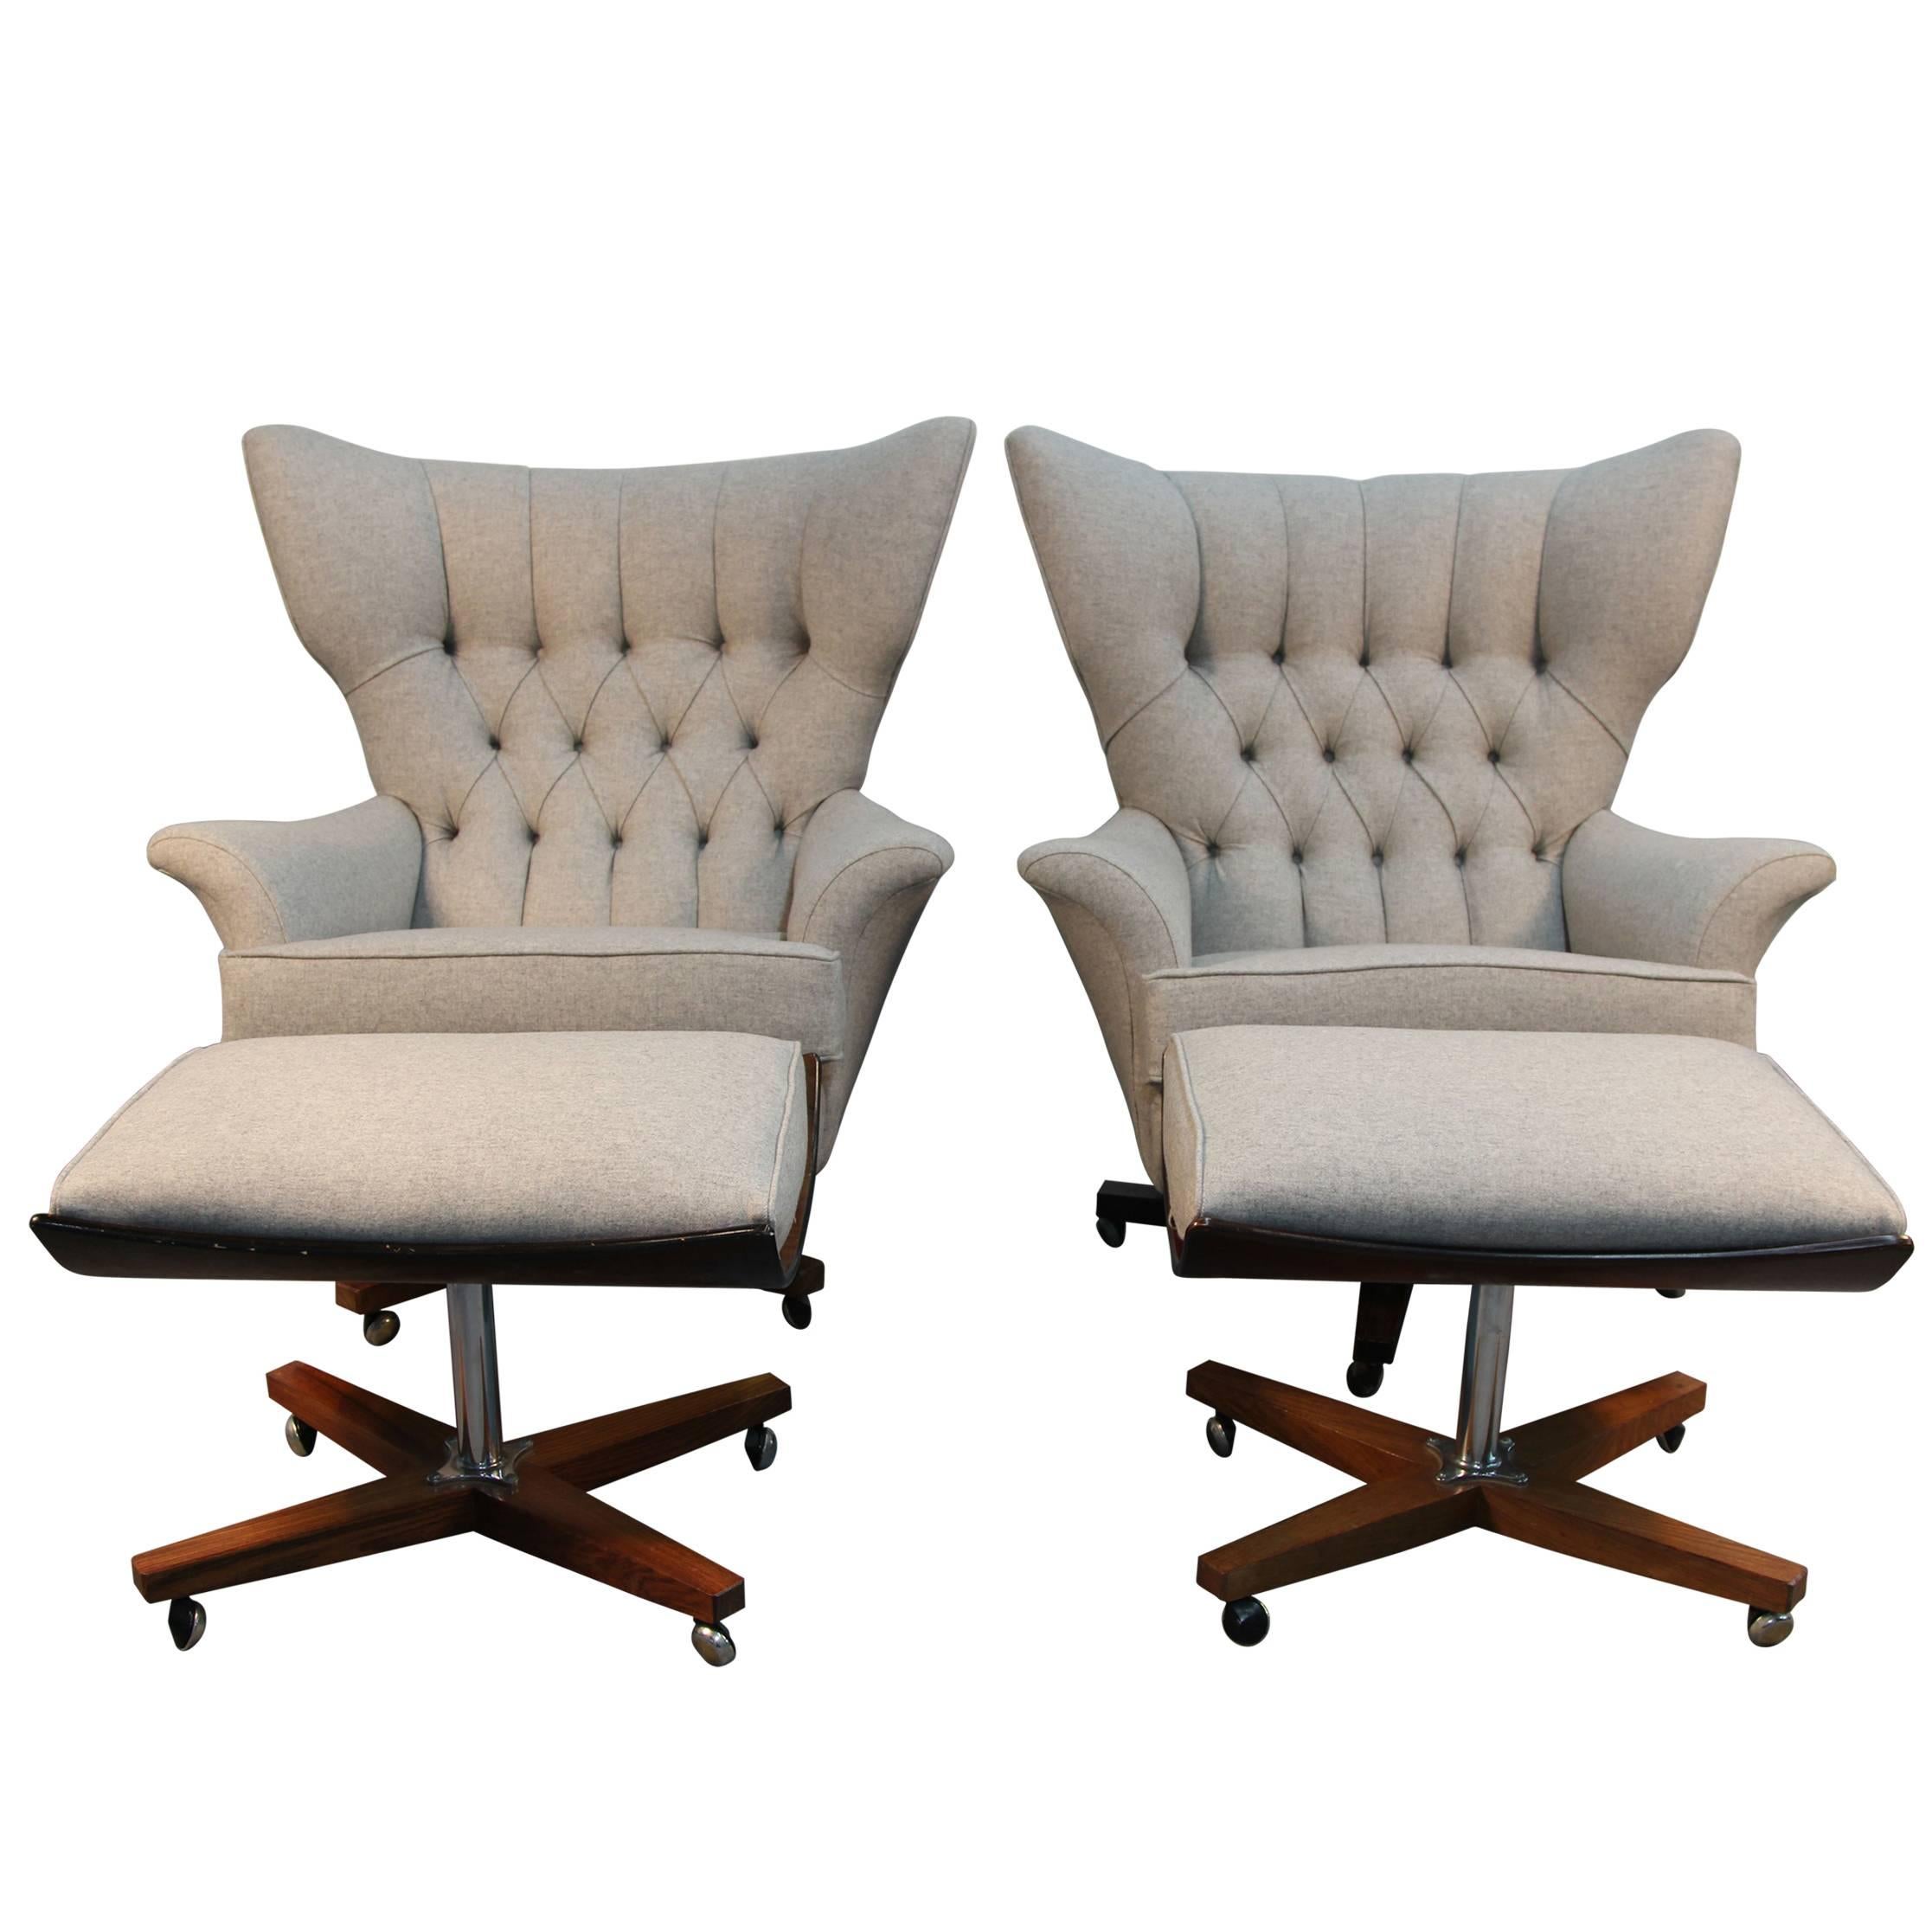 Pair of G-Plan Blofeld Lounge Chairs with Matching Ottomans